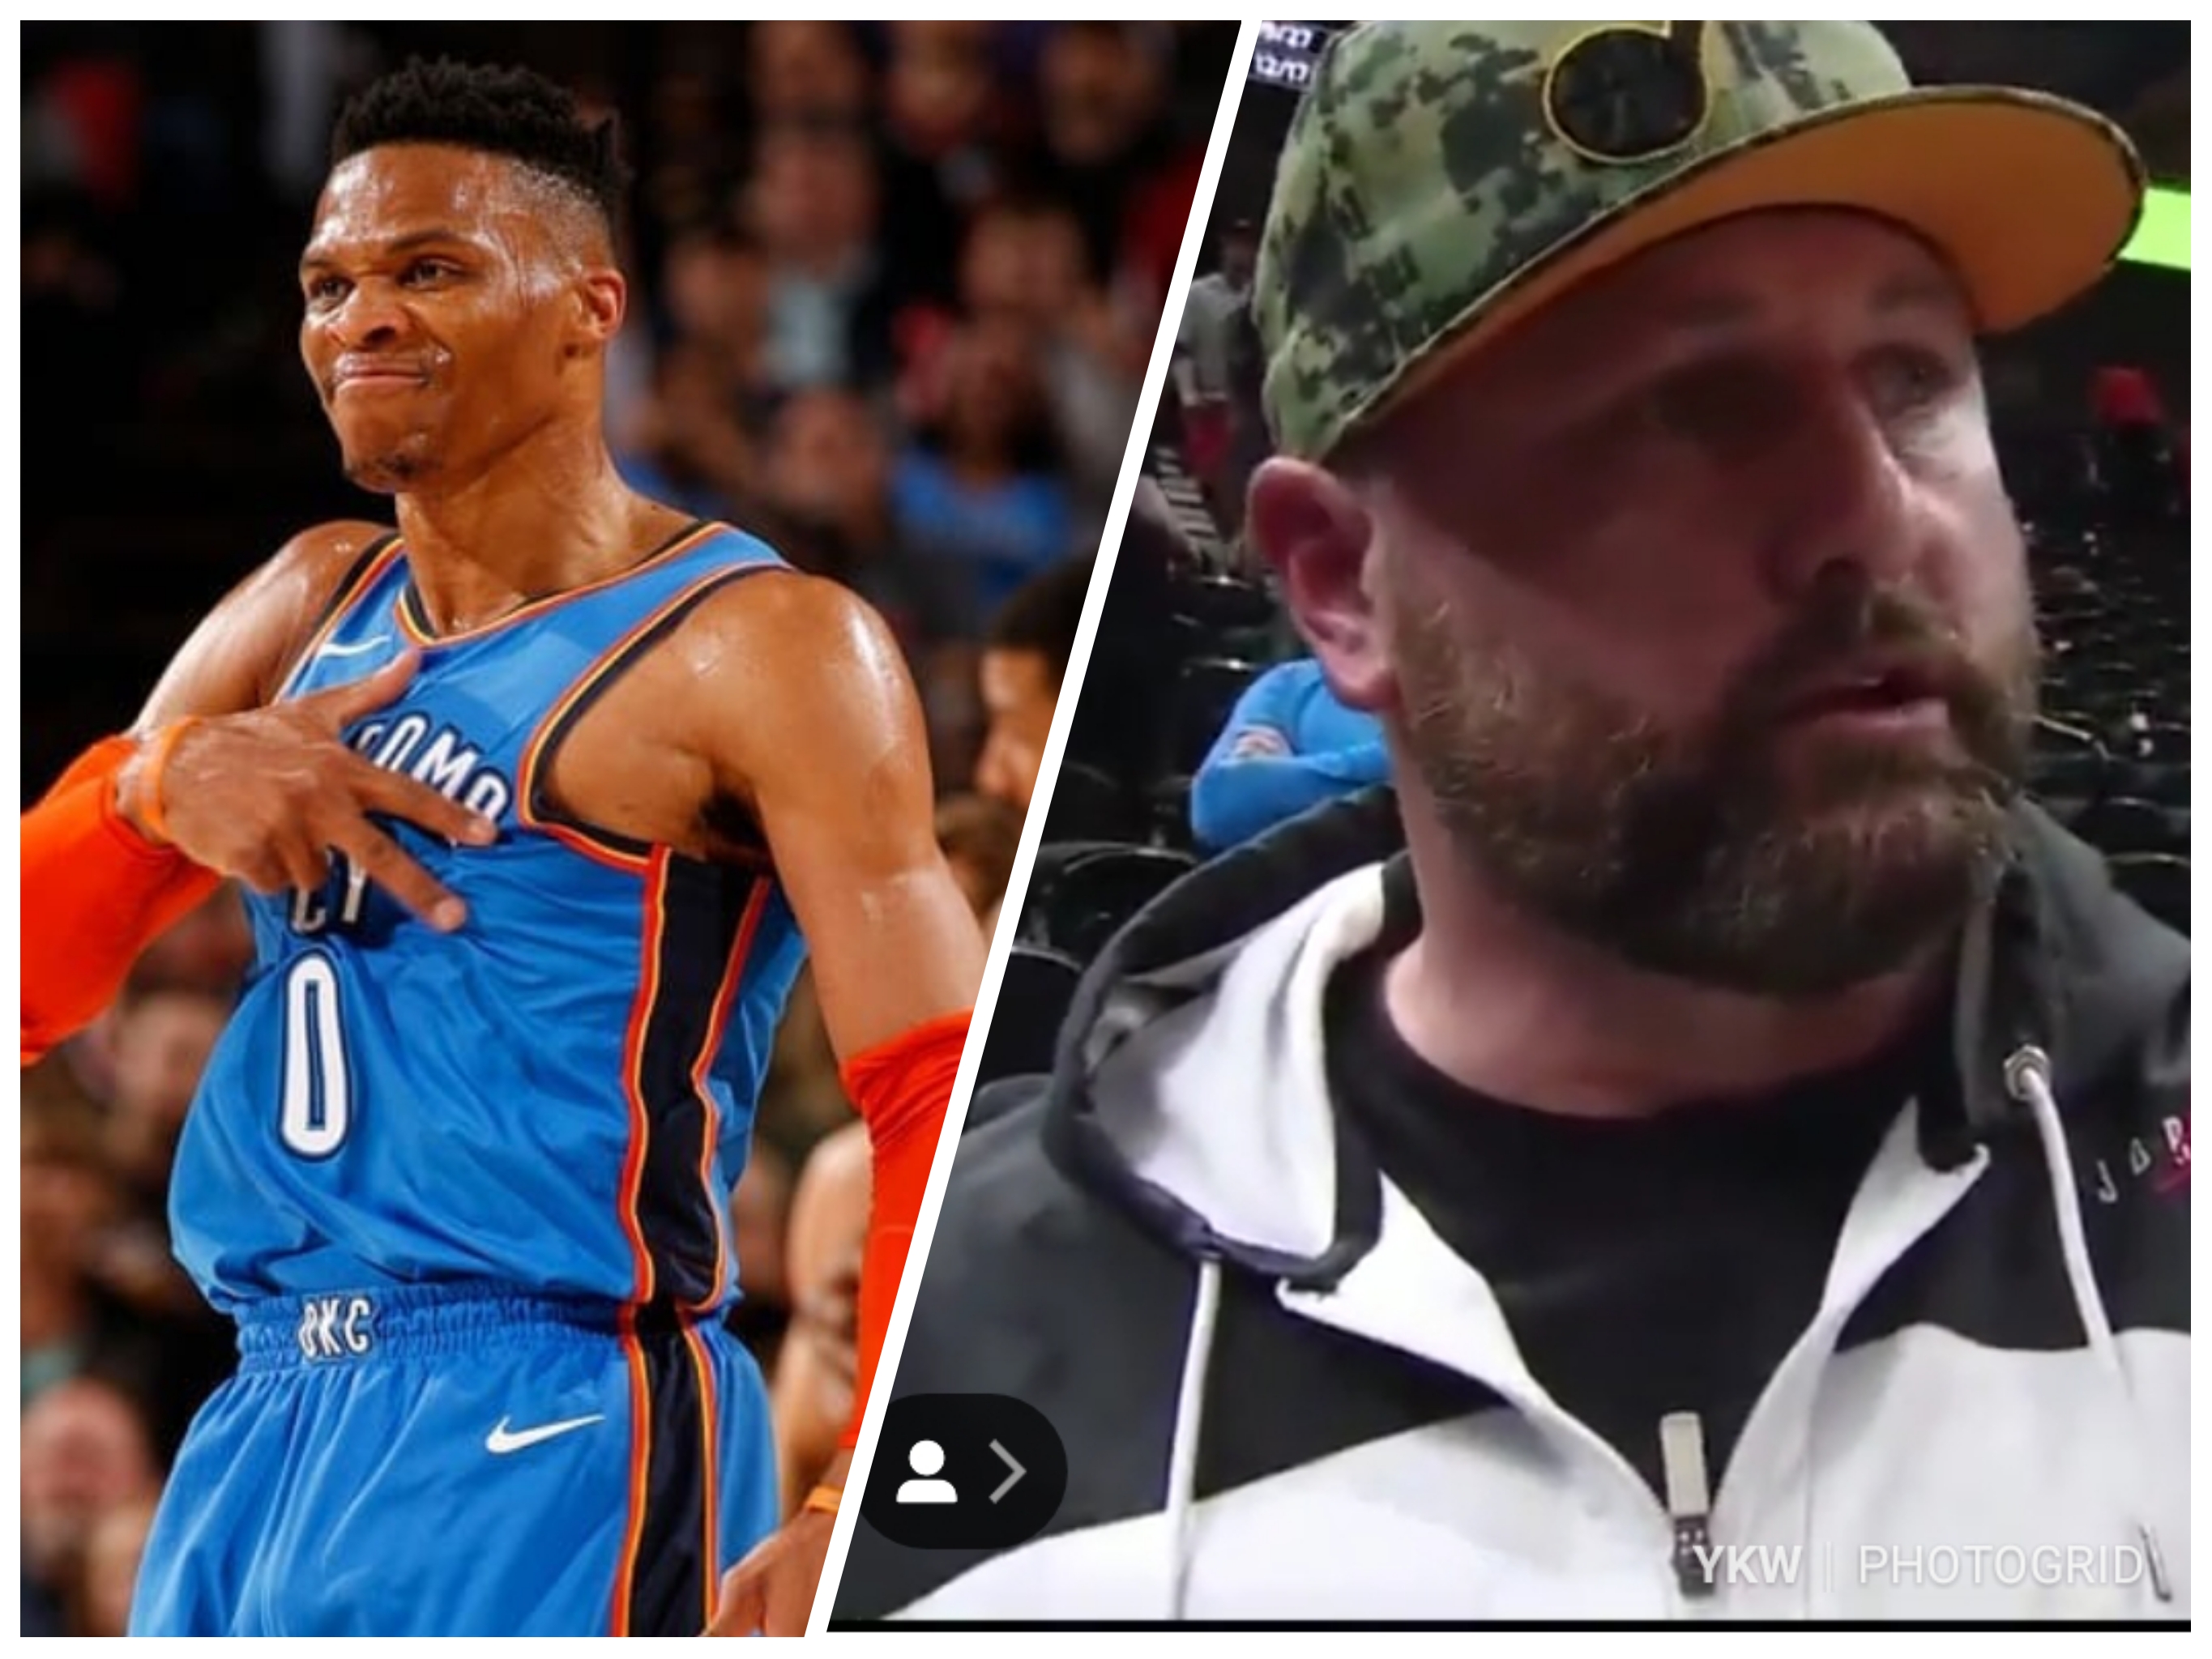 “I’ll F*ck You Up”: Russell Westbrook Said A Racial Comment From A Courtside Fan Started the Altercation